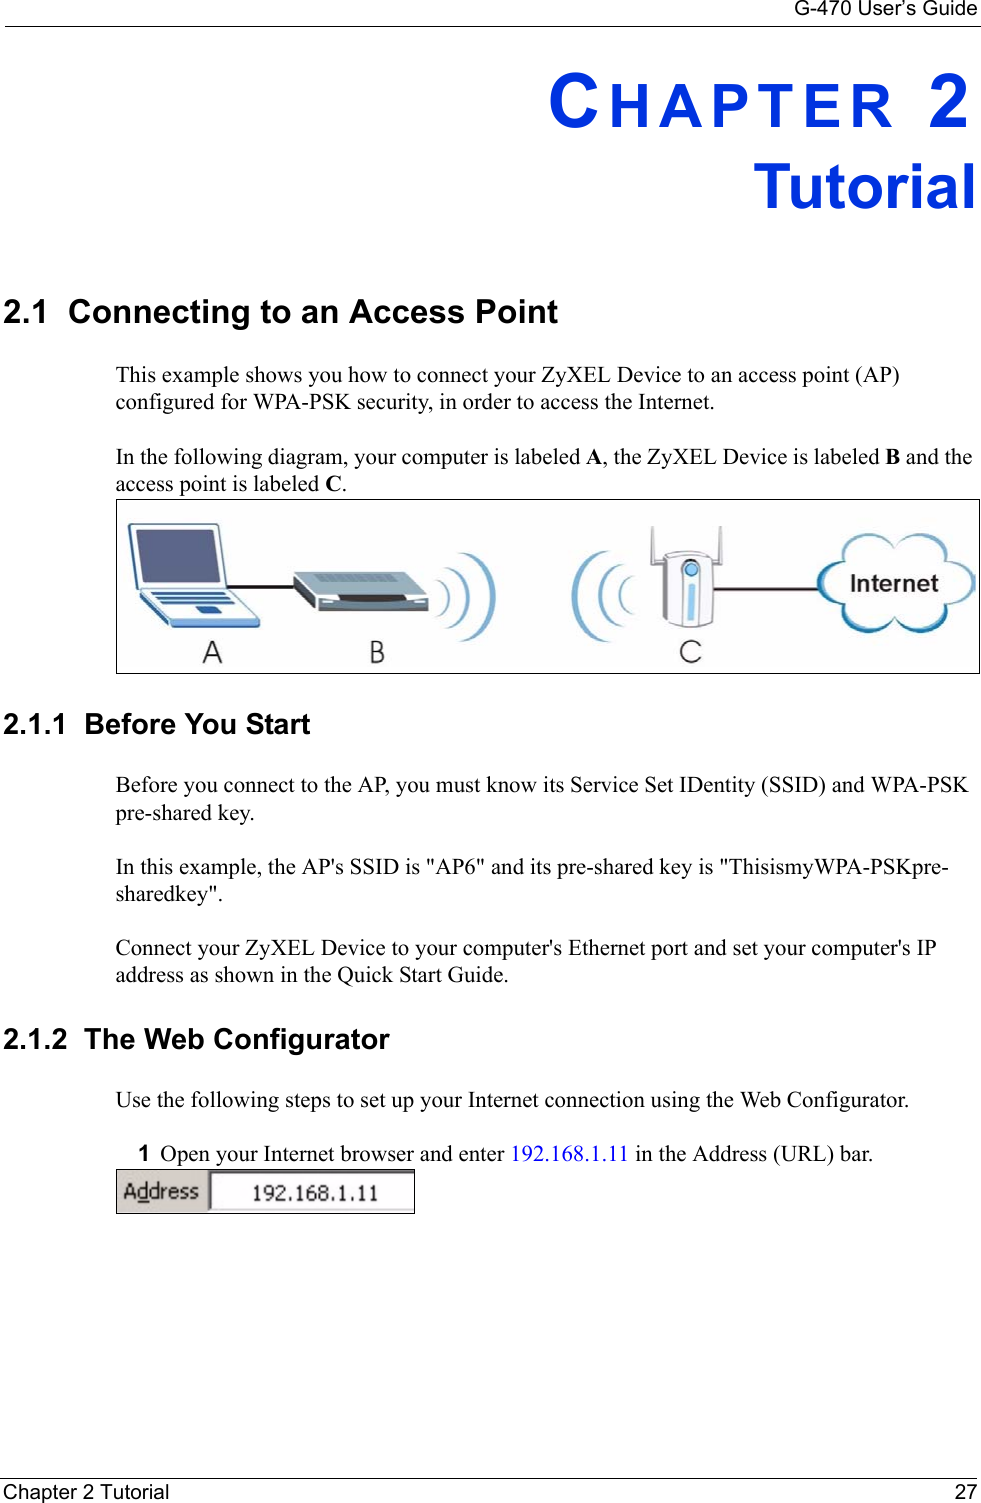 G-470 User’s GuideChapter 2 Tutorial 27CHAPTER 2Tutorial2.1  Connecting to an Access PointThis example shows you how to connect your ZyXEL Device to an access point (AP) configured for WPA-PSK security, in order to access the Internet. In the following diagram, your computer is labeled A, the ZyXEL Device is labeled B and the access point is labeled C.2.1.1  Before You StartBefore you connect to the AP, you must know its Service Set IDentity (SSID) and WPA-PSK pre-shared key. In this example, the AP&apos;s SSID is &quot;AP6&quot; and its pre-shared key is &quot;ThisismyWPA-PSKpre-sharedkey&quot;.Connect your ZyXEL Device to your computer&apos;s Ethernet port and set your computer&apos;s IP address as shown in the Quick Start Guide. 2.1.2  The Web ConfiguratorUse the following steps to set up your Internet connection using the Web Configurator.1Open your Internet browser and enter 192.168.1.11 in the Address (URL) bar. 